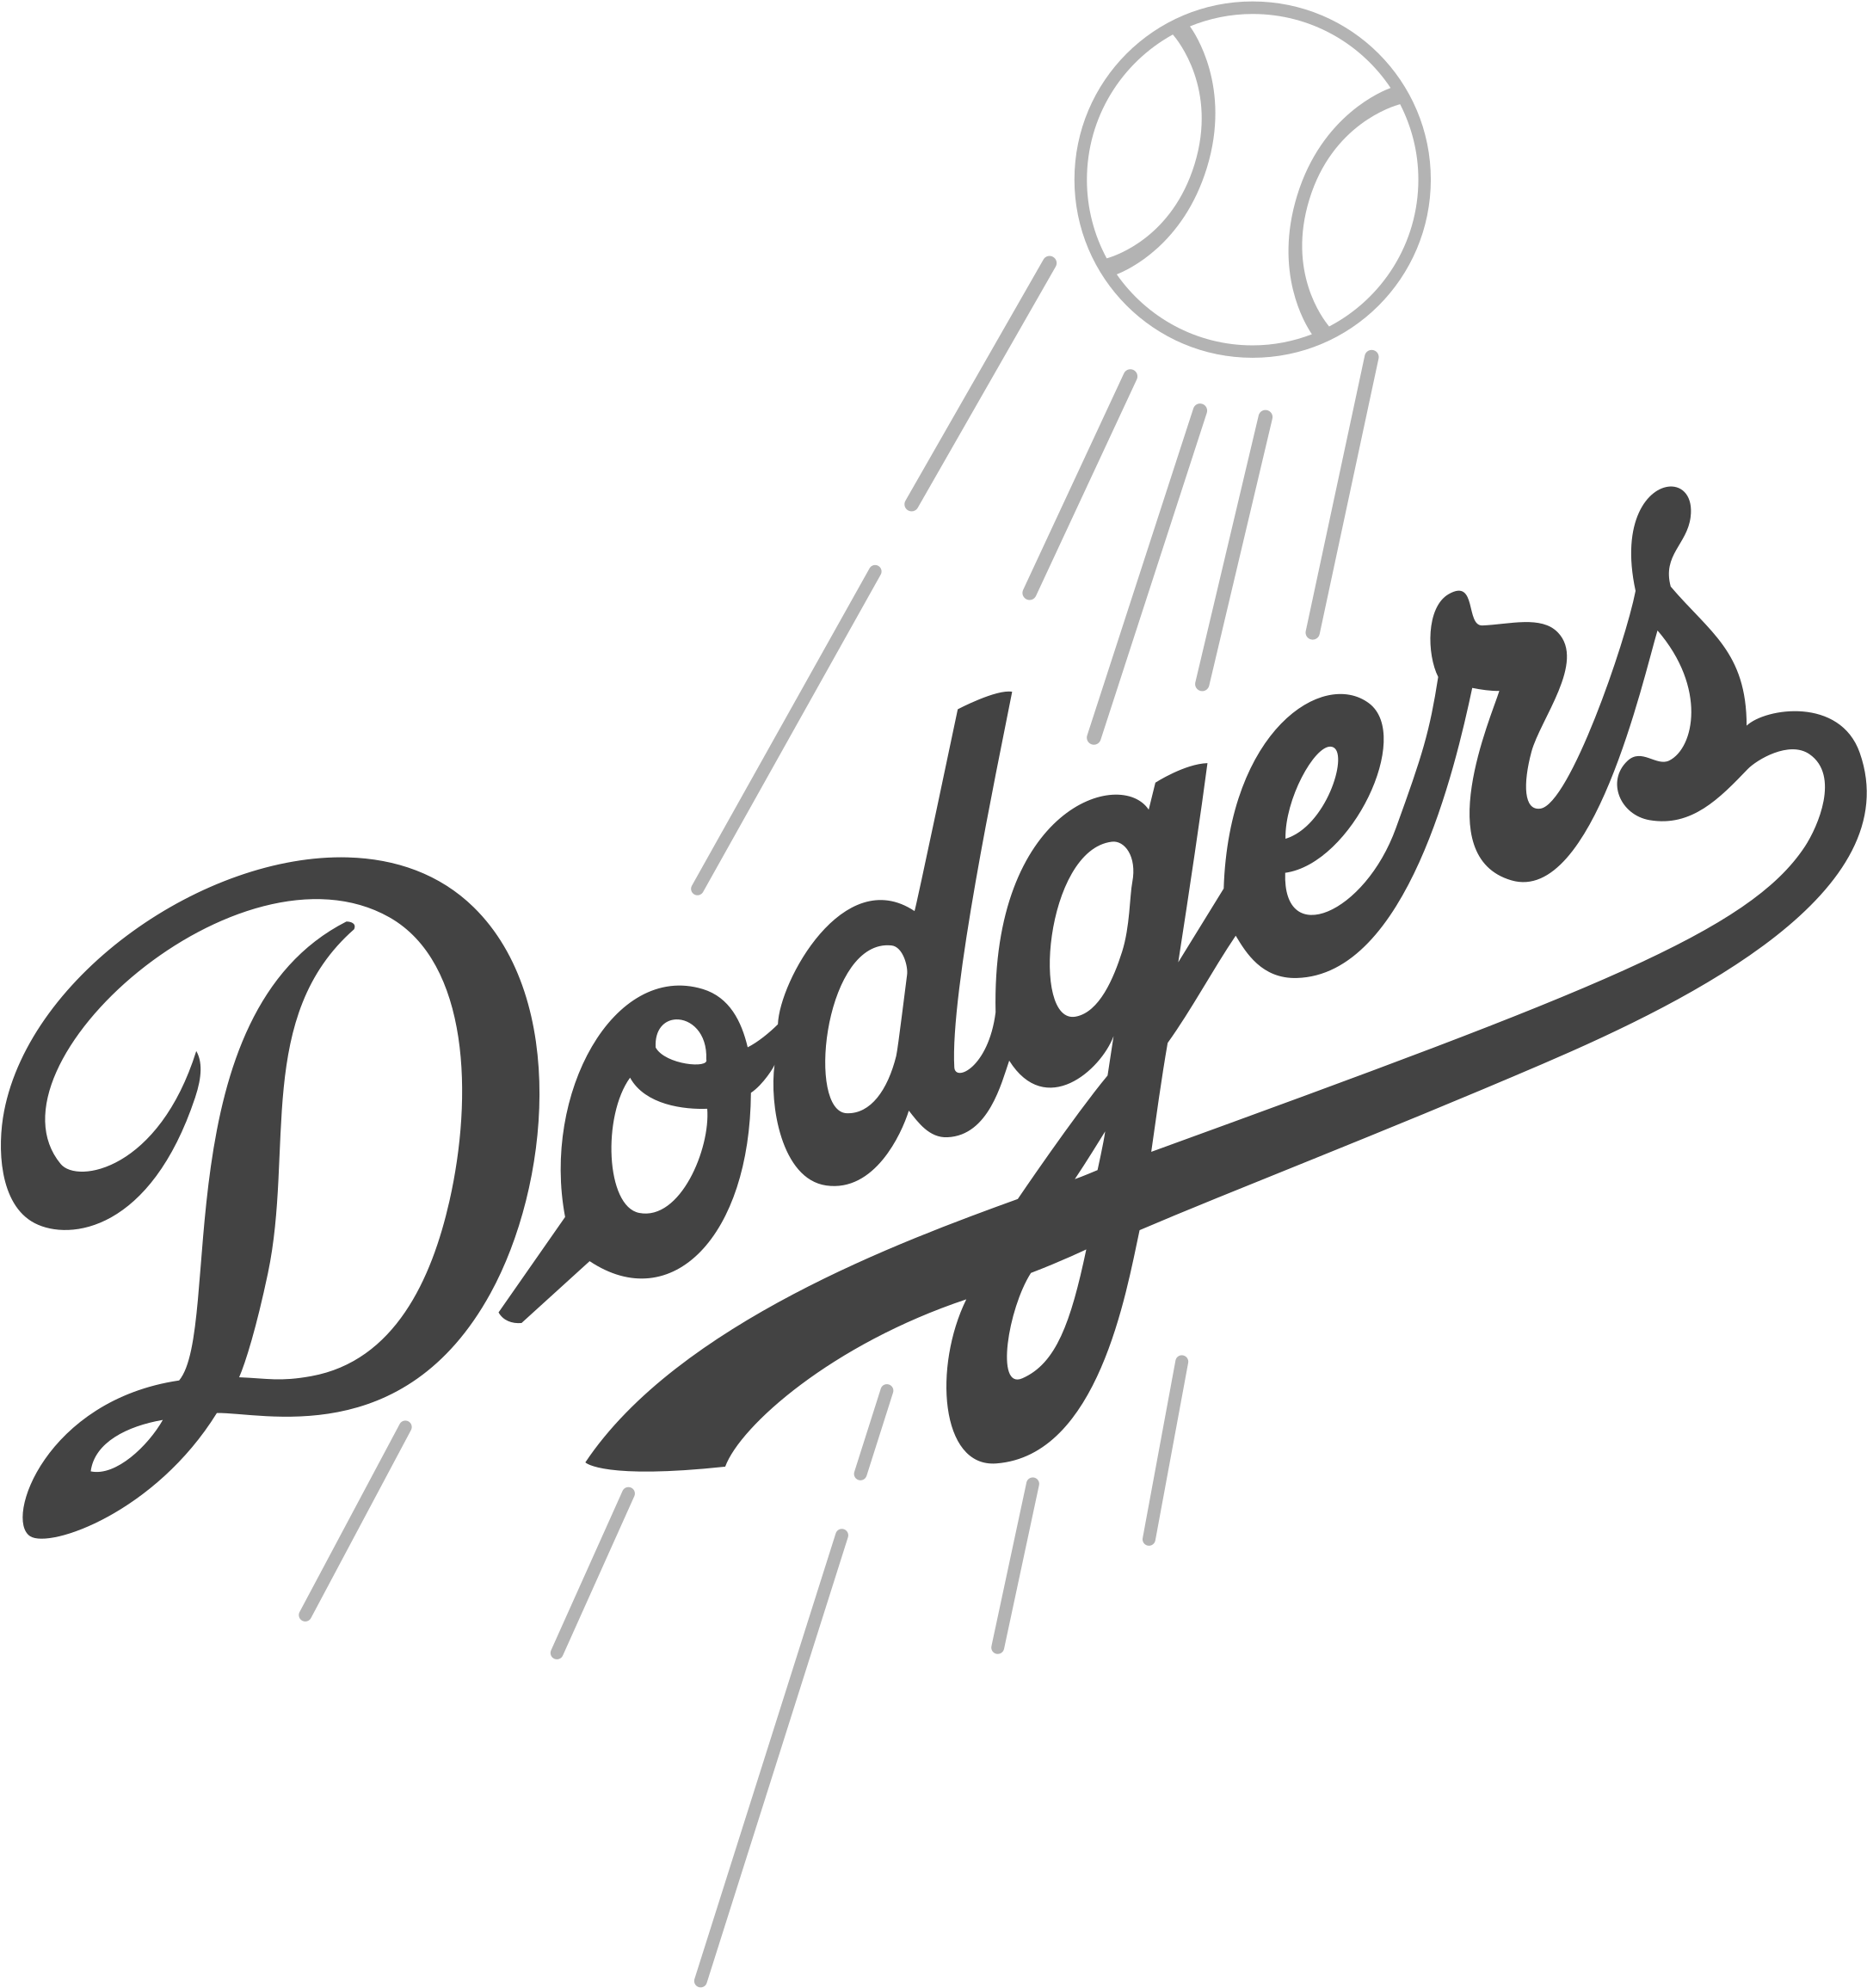 Los Angeles Dodgers Logo Black And White - Angeles Dodgers (2400x2600)